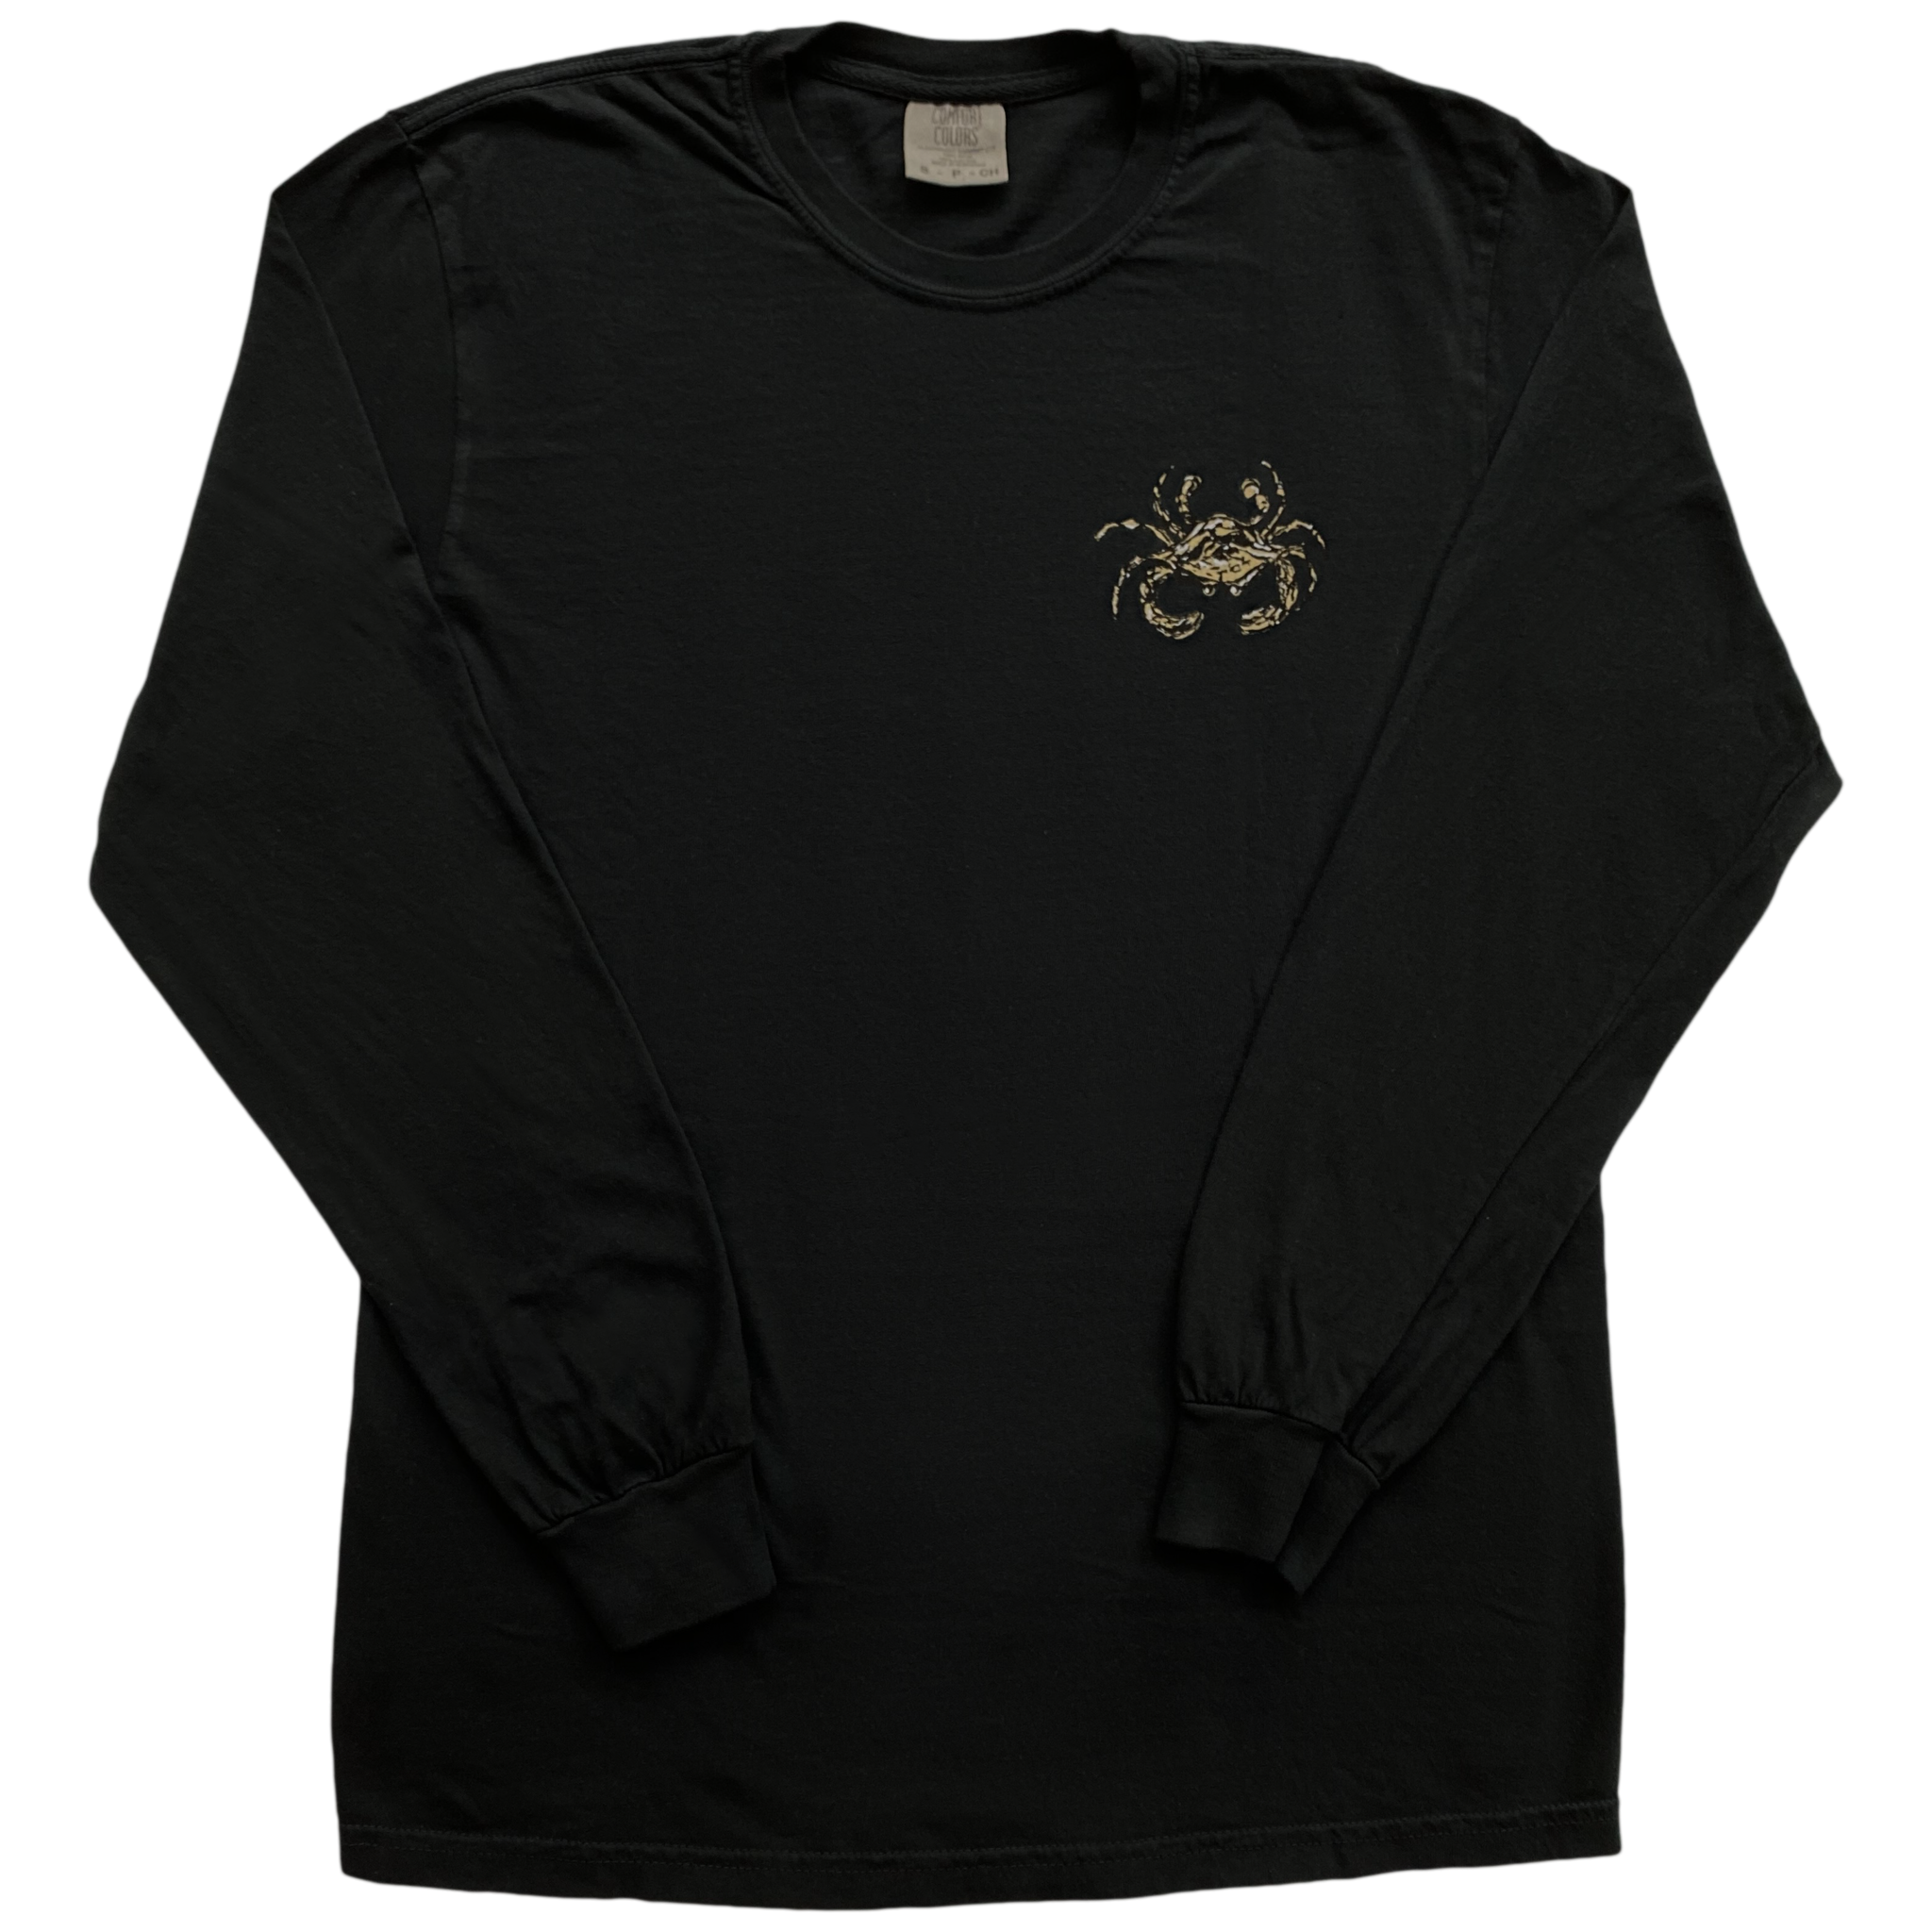 A black long sleeve cotton t-shirt with a black, gold, and white crab on the left chest.  